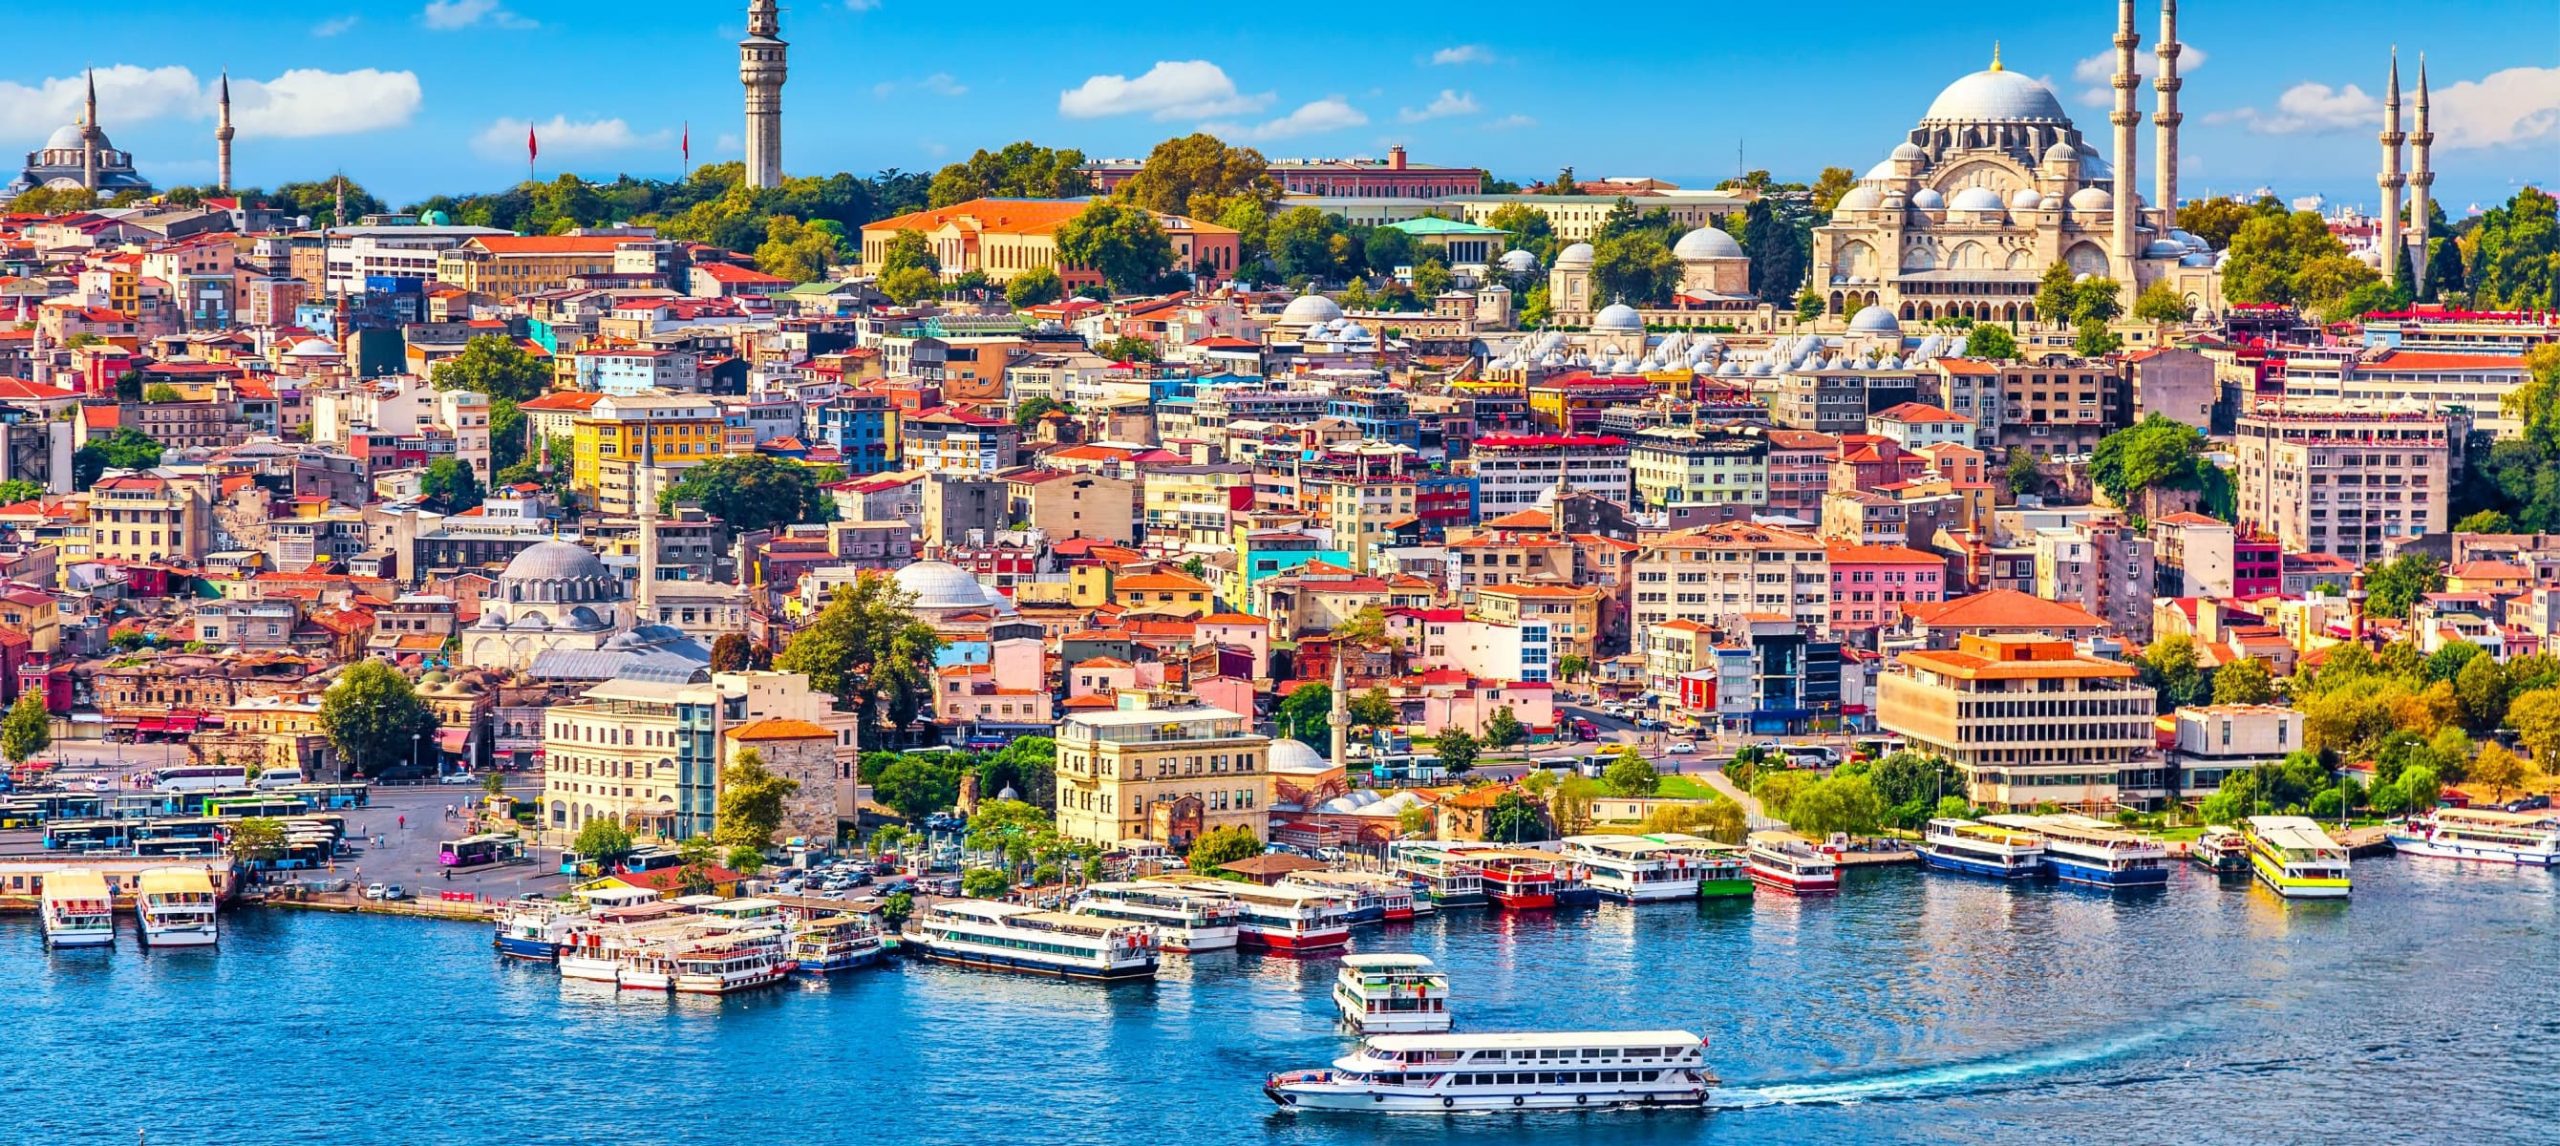 turkey day tours from istanbul